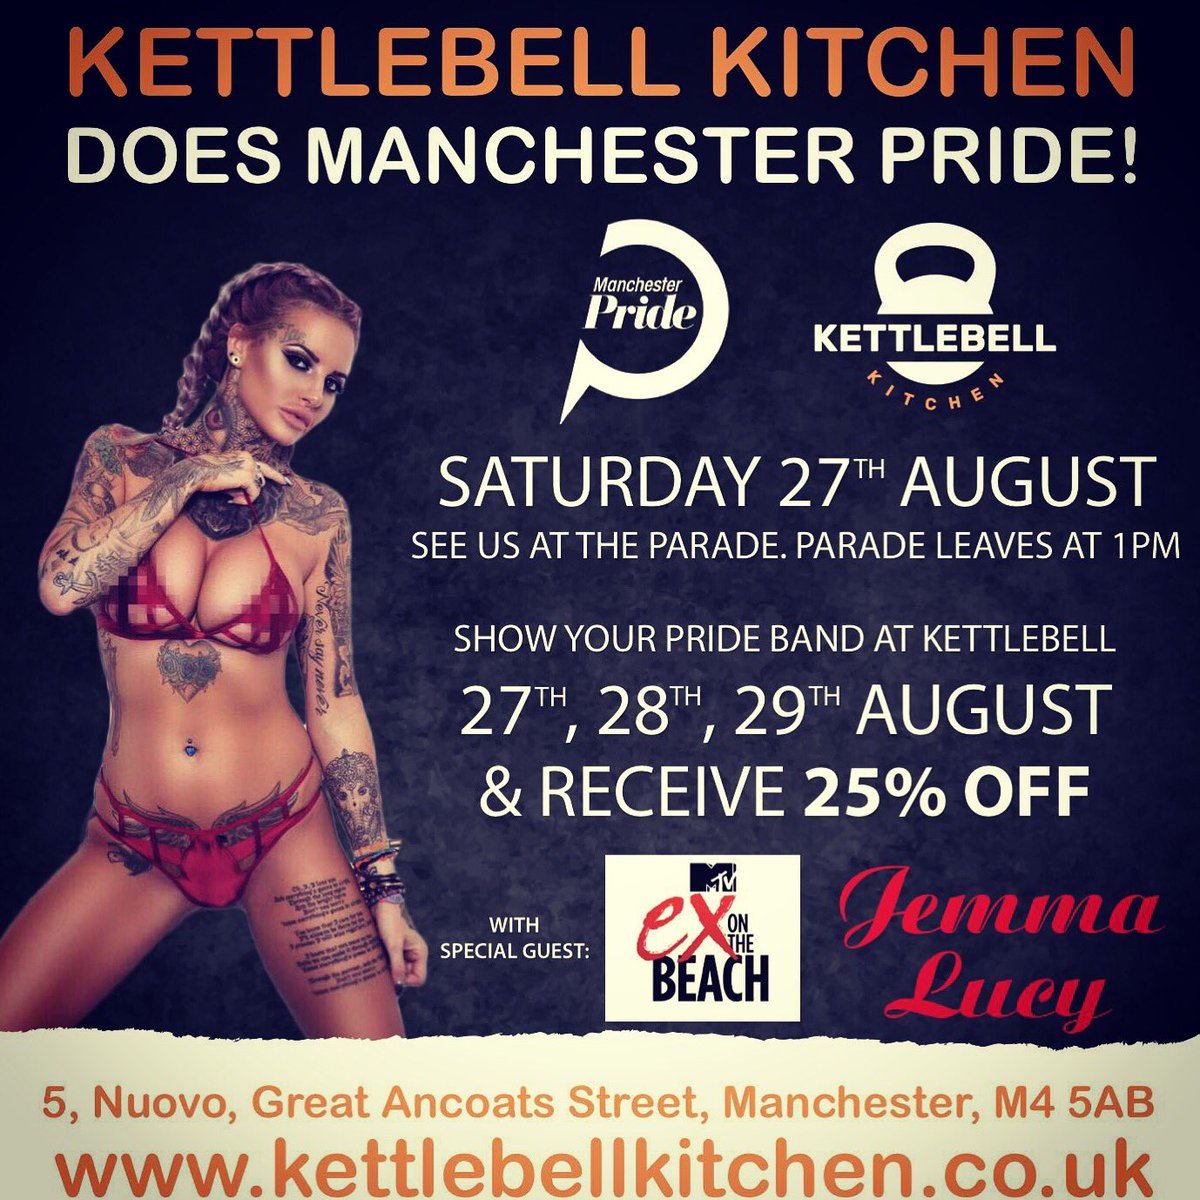 So excited to be part of @kettlebellKMCR at gay pride tomorrow!!! Come see us ????????????????❤️ https://t.co/zd9Cucw237